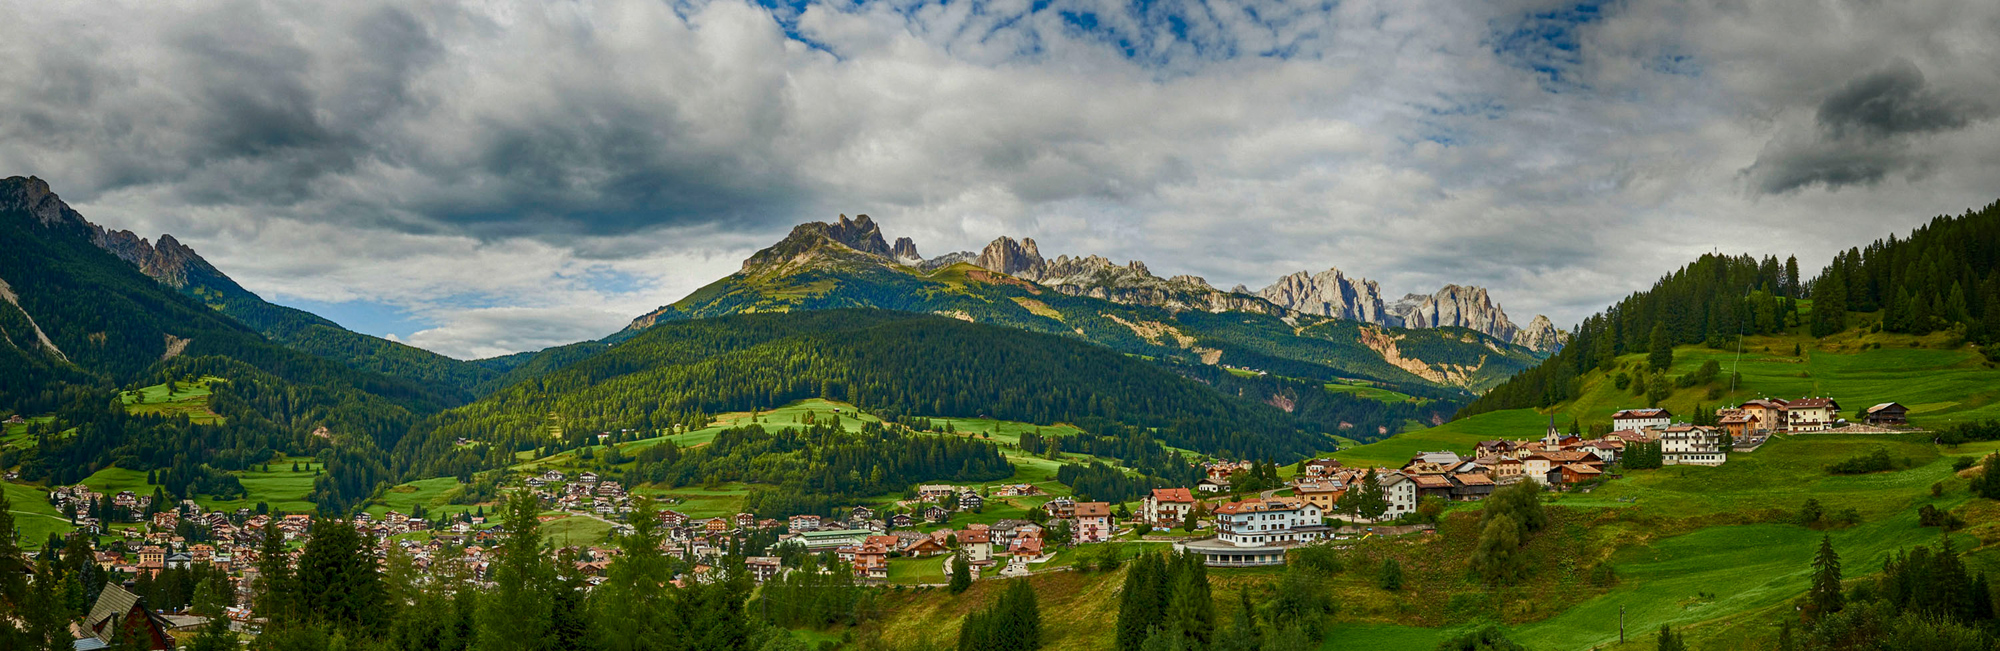 Extreme pano, a village in the Dolomites, 8 image stitch, Phase One camera.